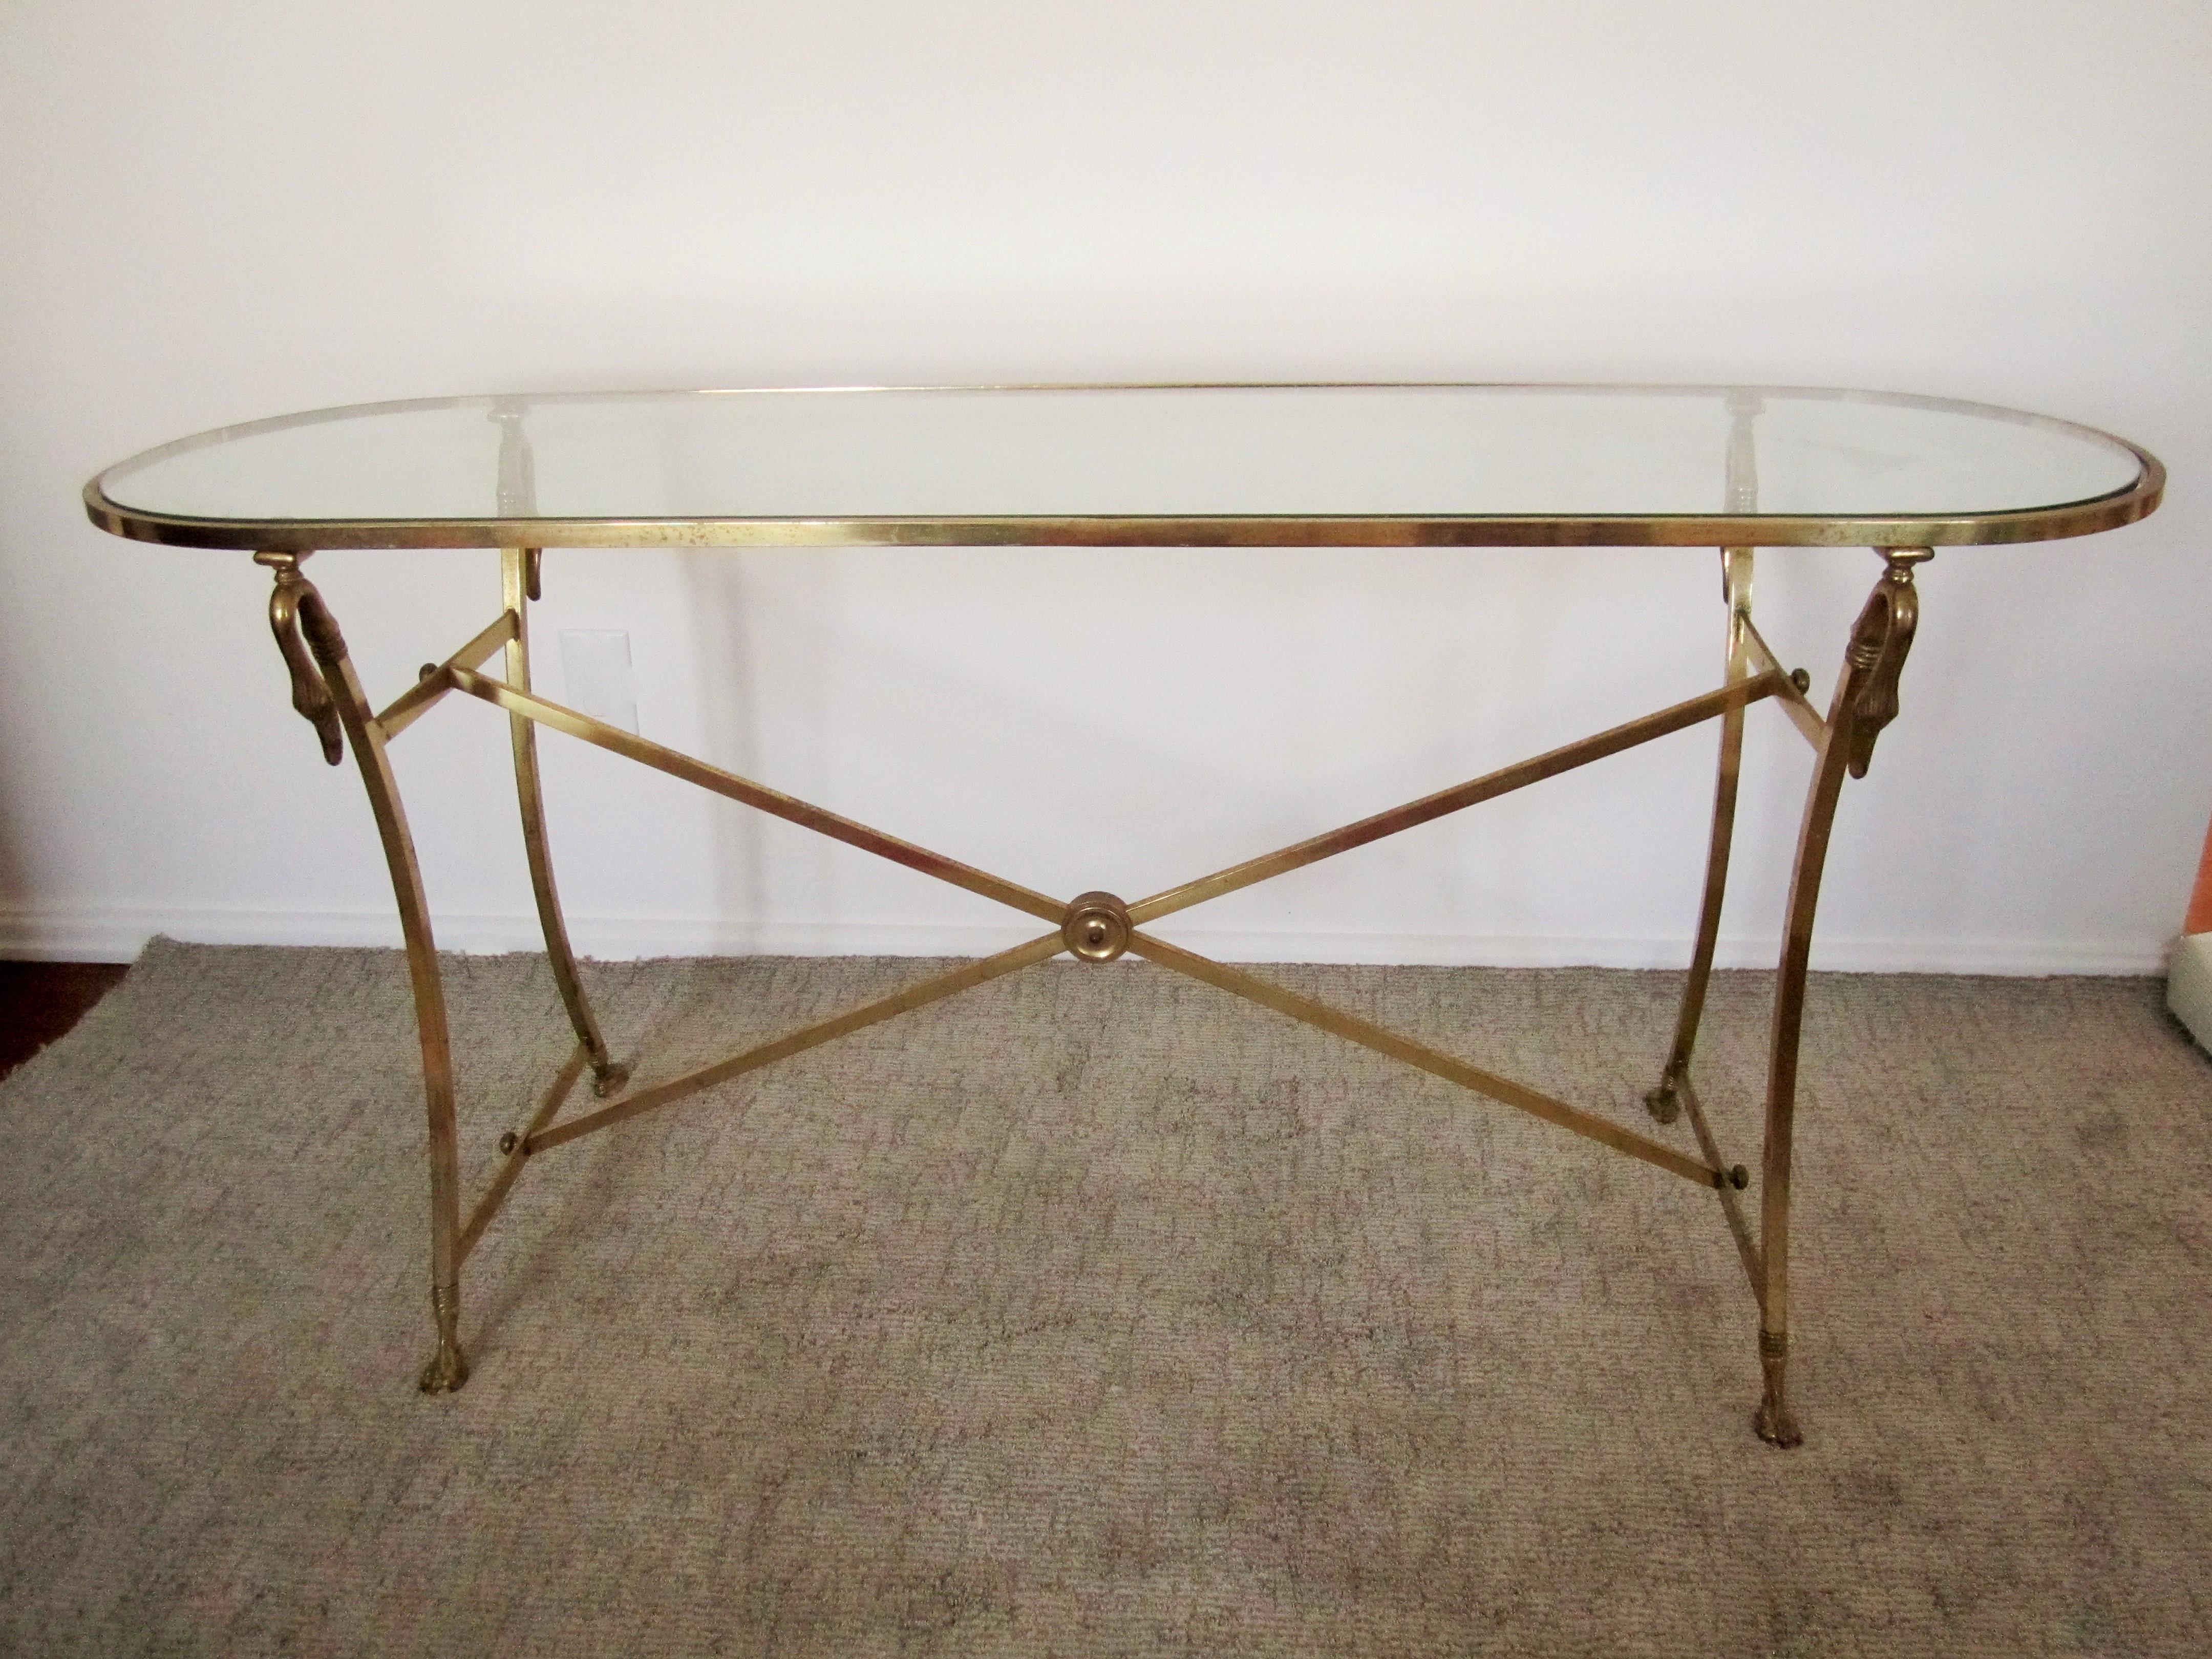 A Regency style Italian or French console table in brass and glass, circa mid-20th century. Consoles' brass base has swan head and neck detailing at top, ball and claw feet at base, with stretcher in-between, and an 'inset' glass top. Console has